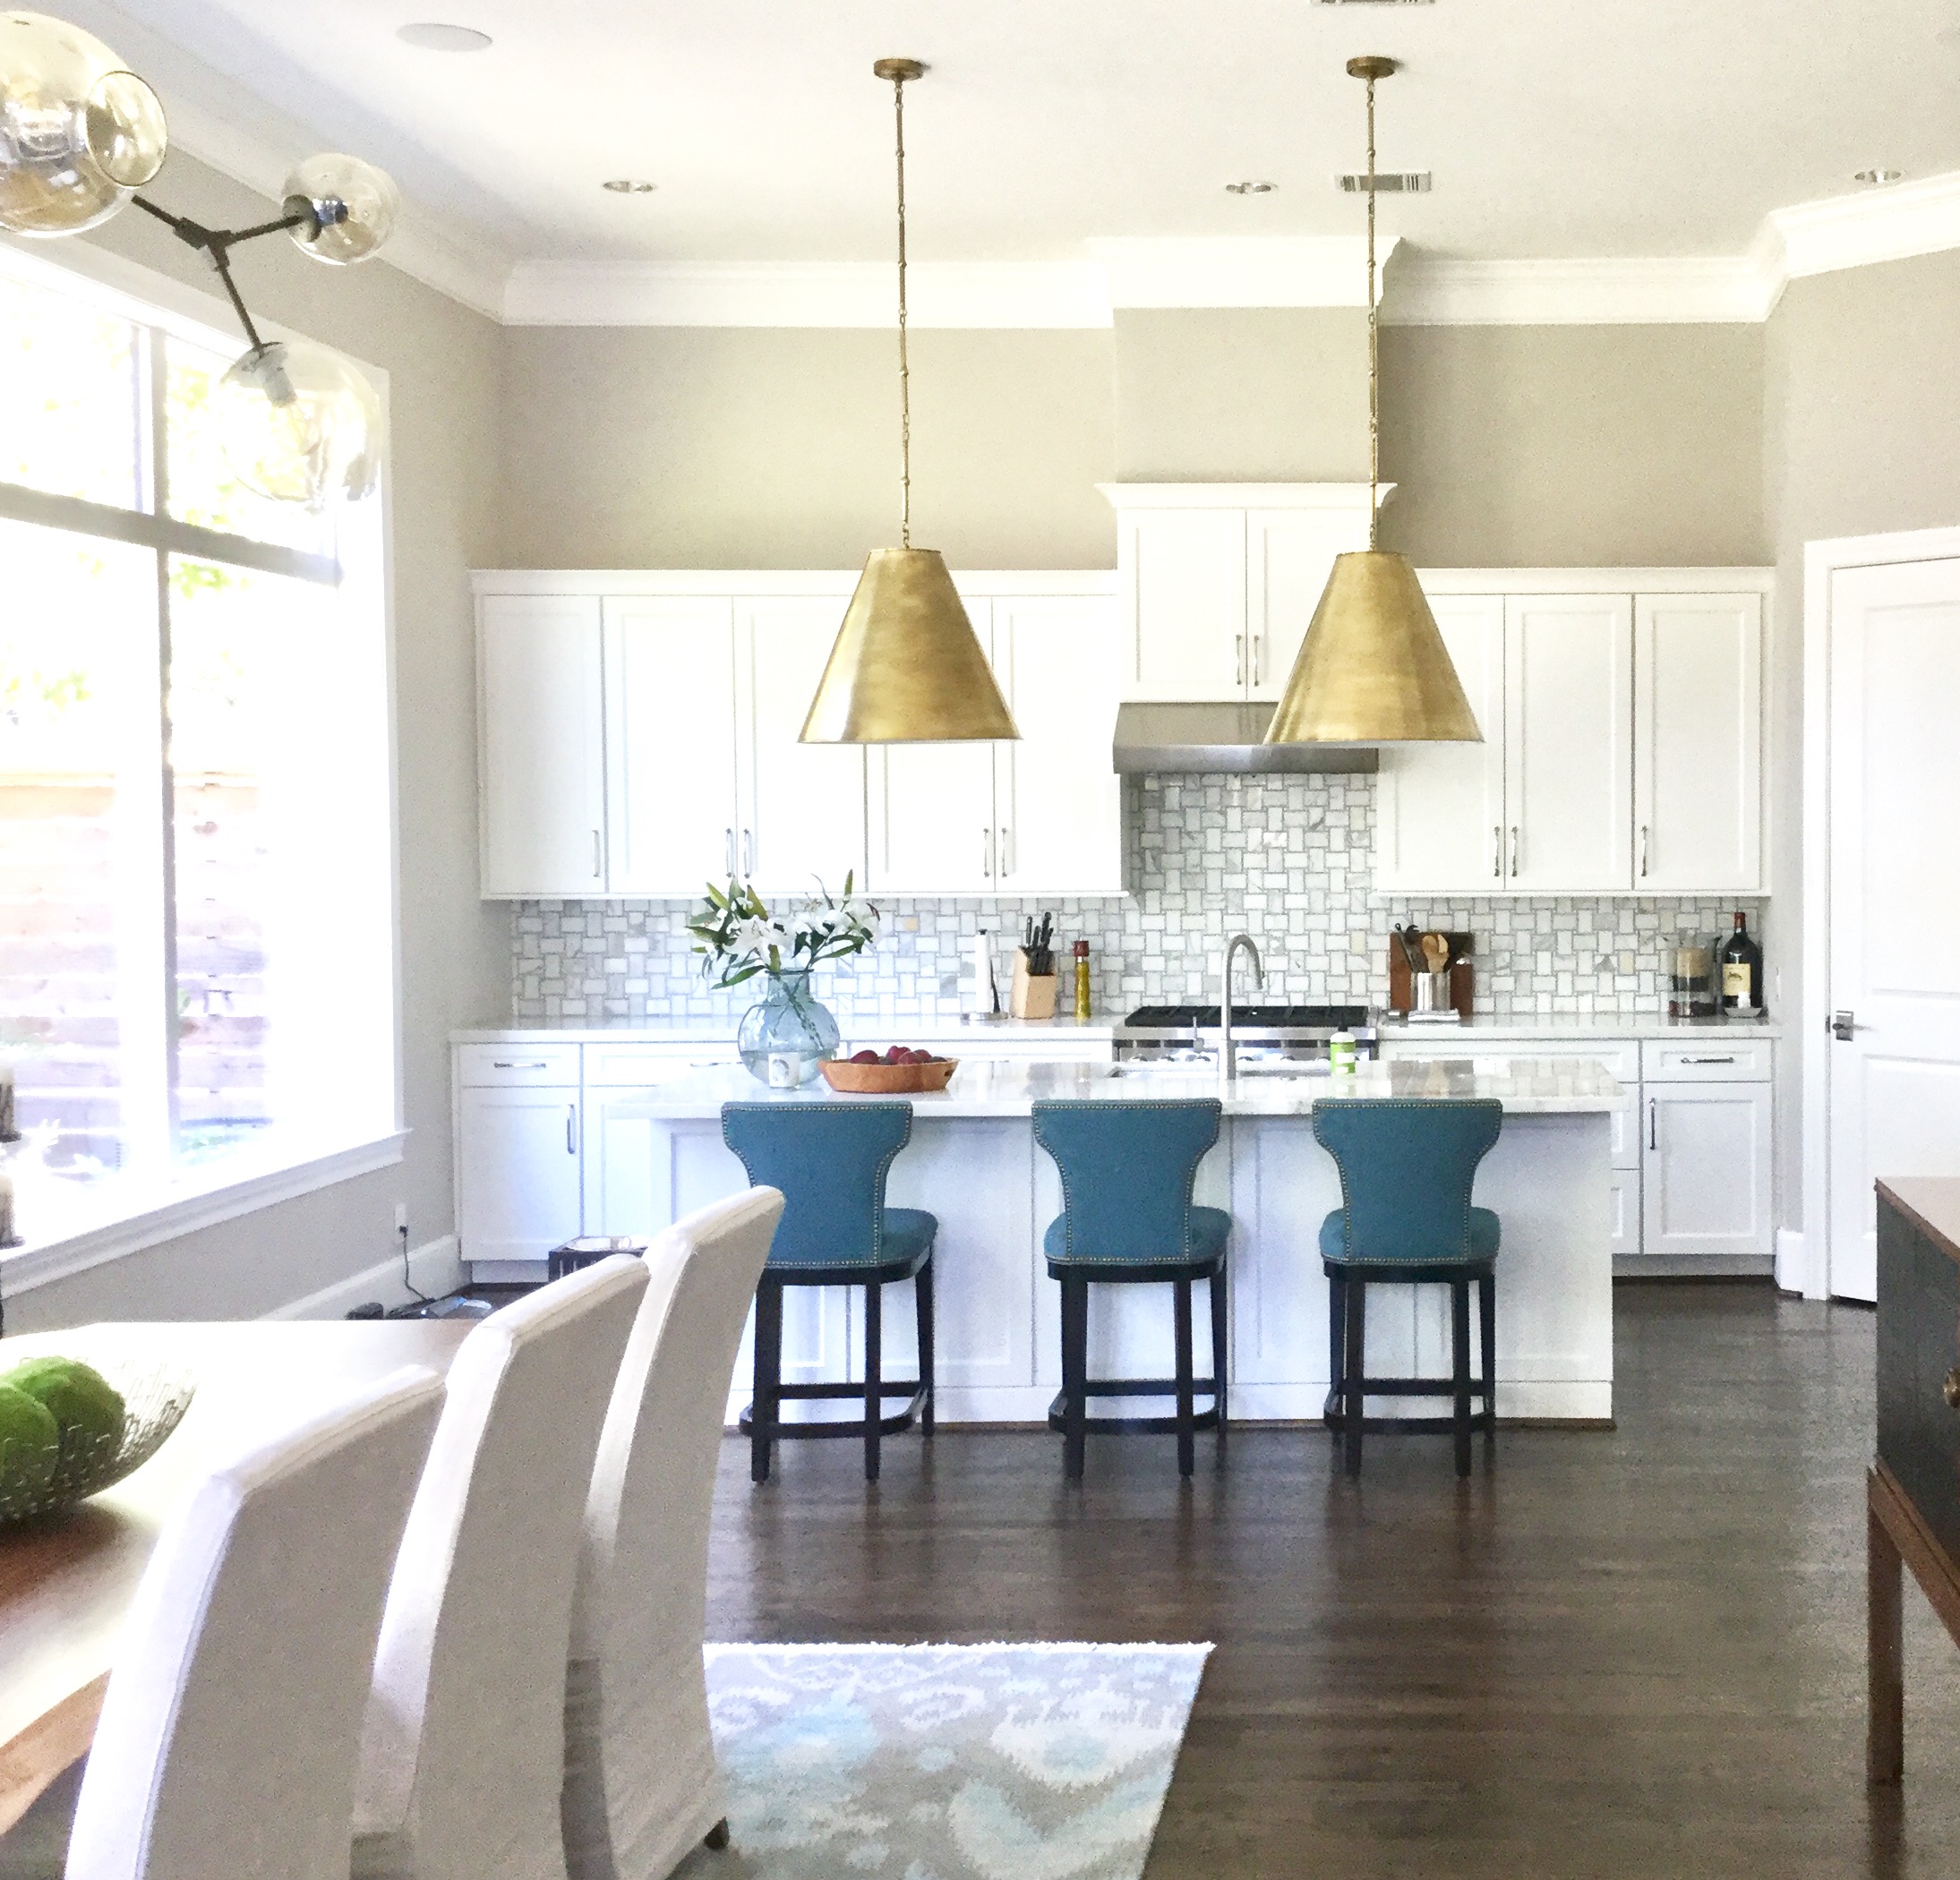 7 Considerations For Kitchen Island Pendant Lighting Selection Designed